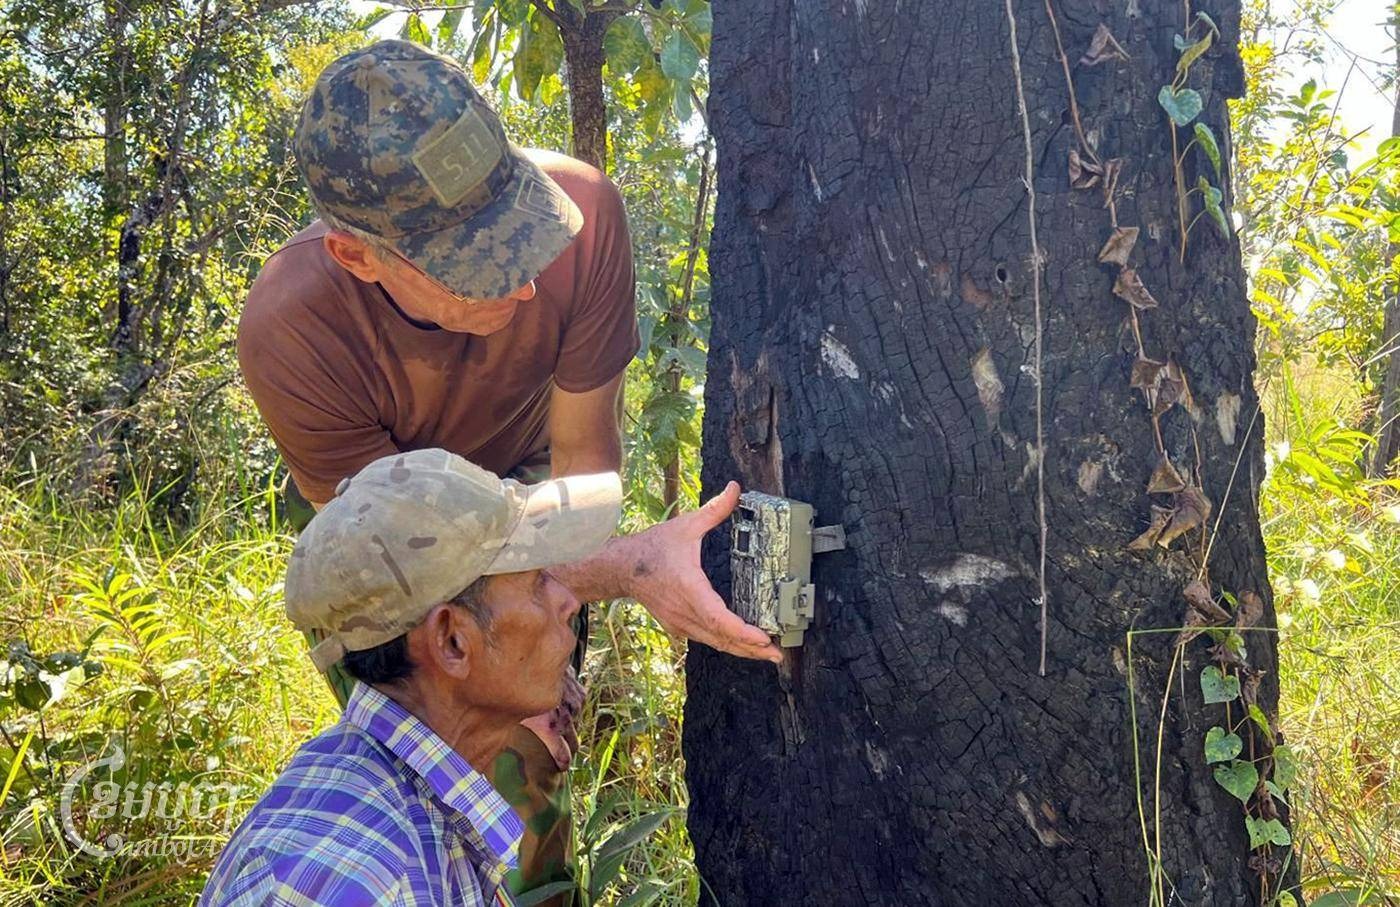 Ben Davis and a Cambodian community ranger crouch next to a tree while securing a camera to its trunk.